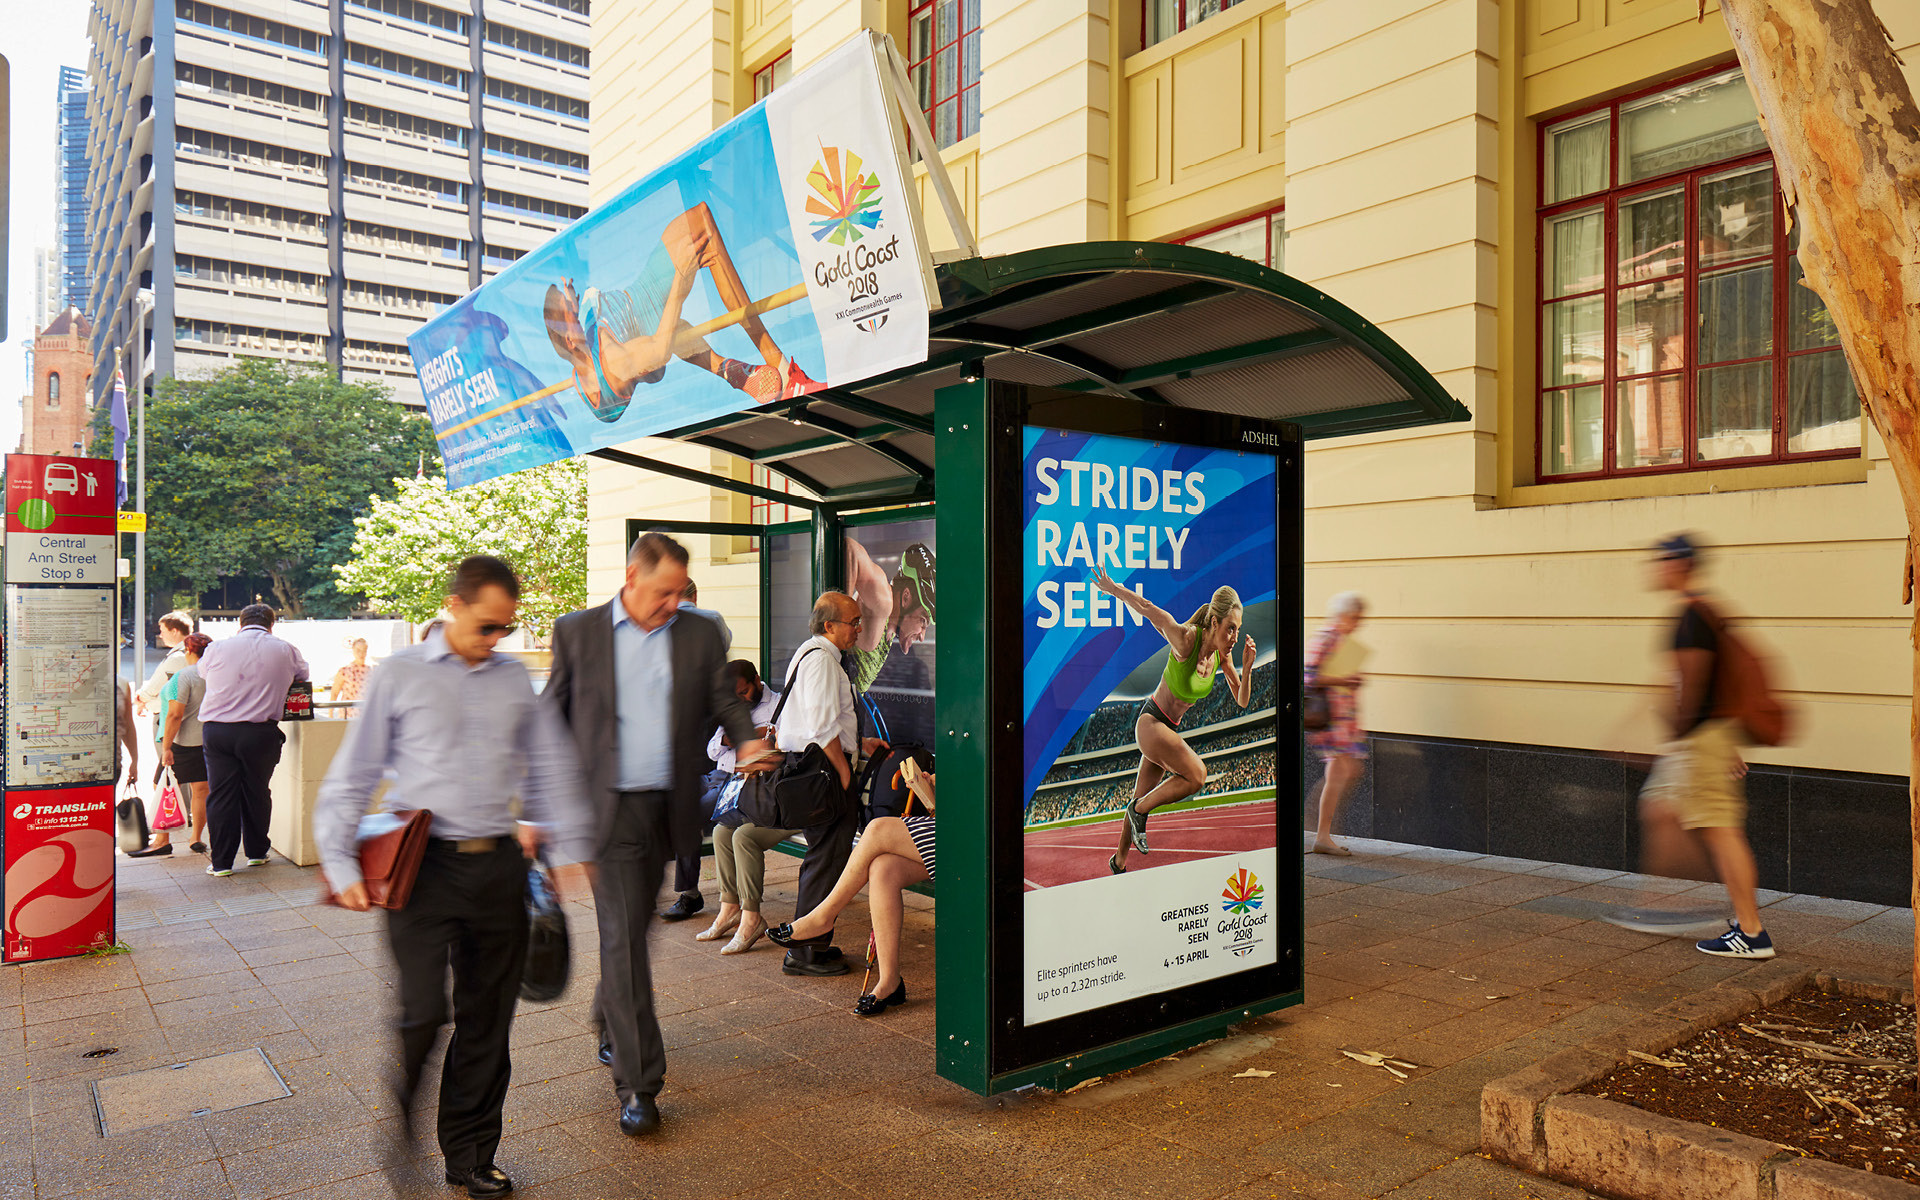 A big advertising campaign has been taking place in the Gold Coast to promote next year's Commonwealth Games ©Adshel